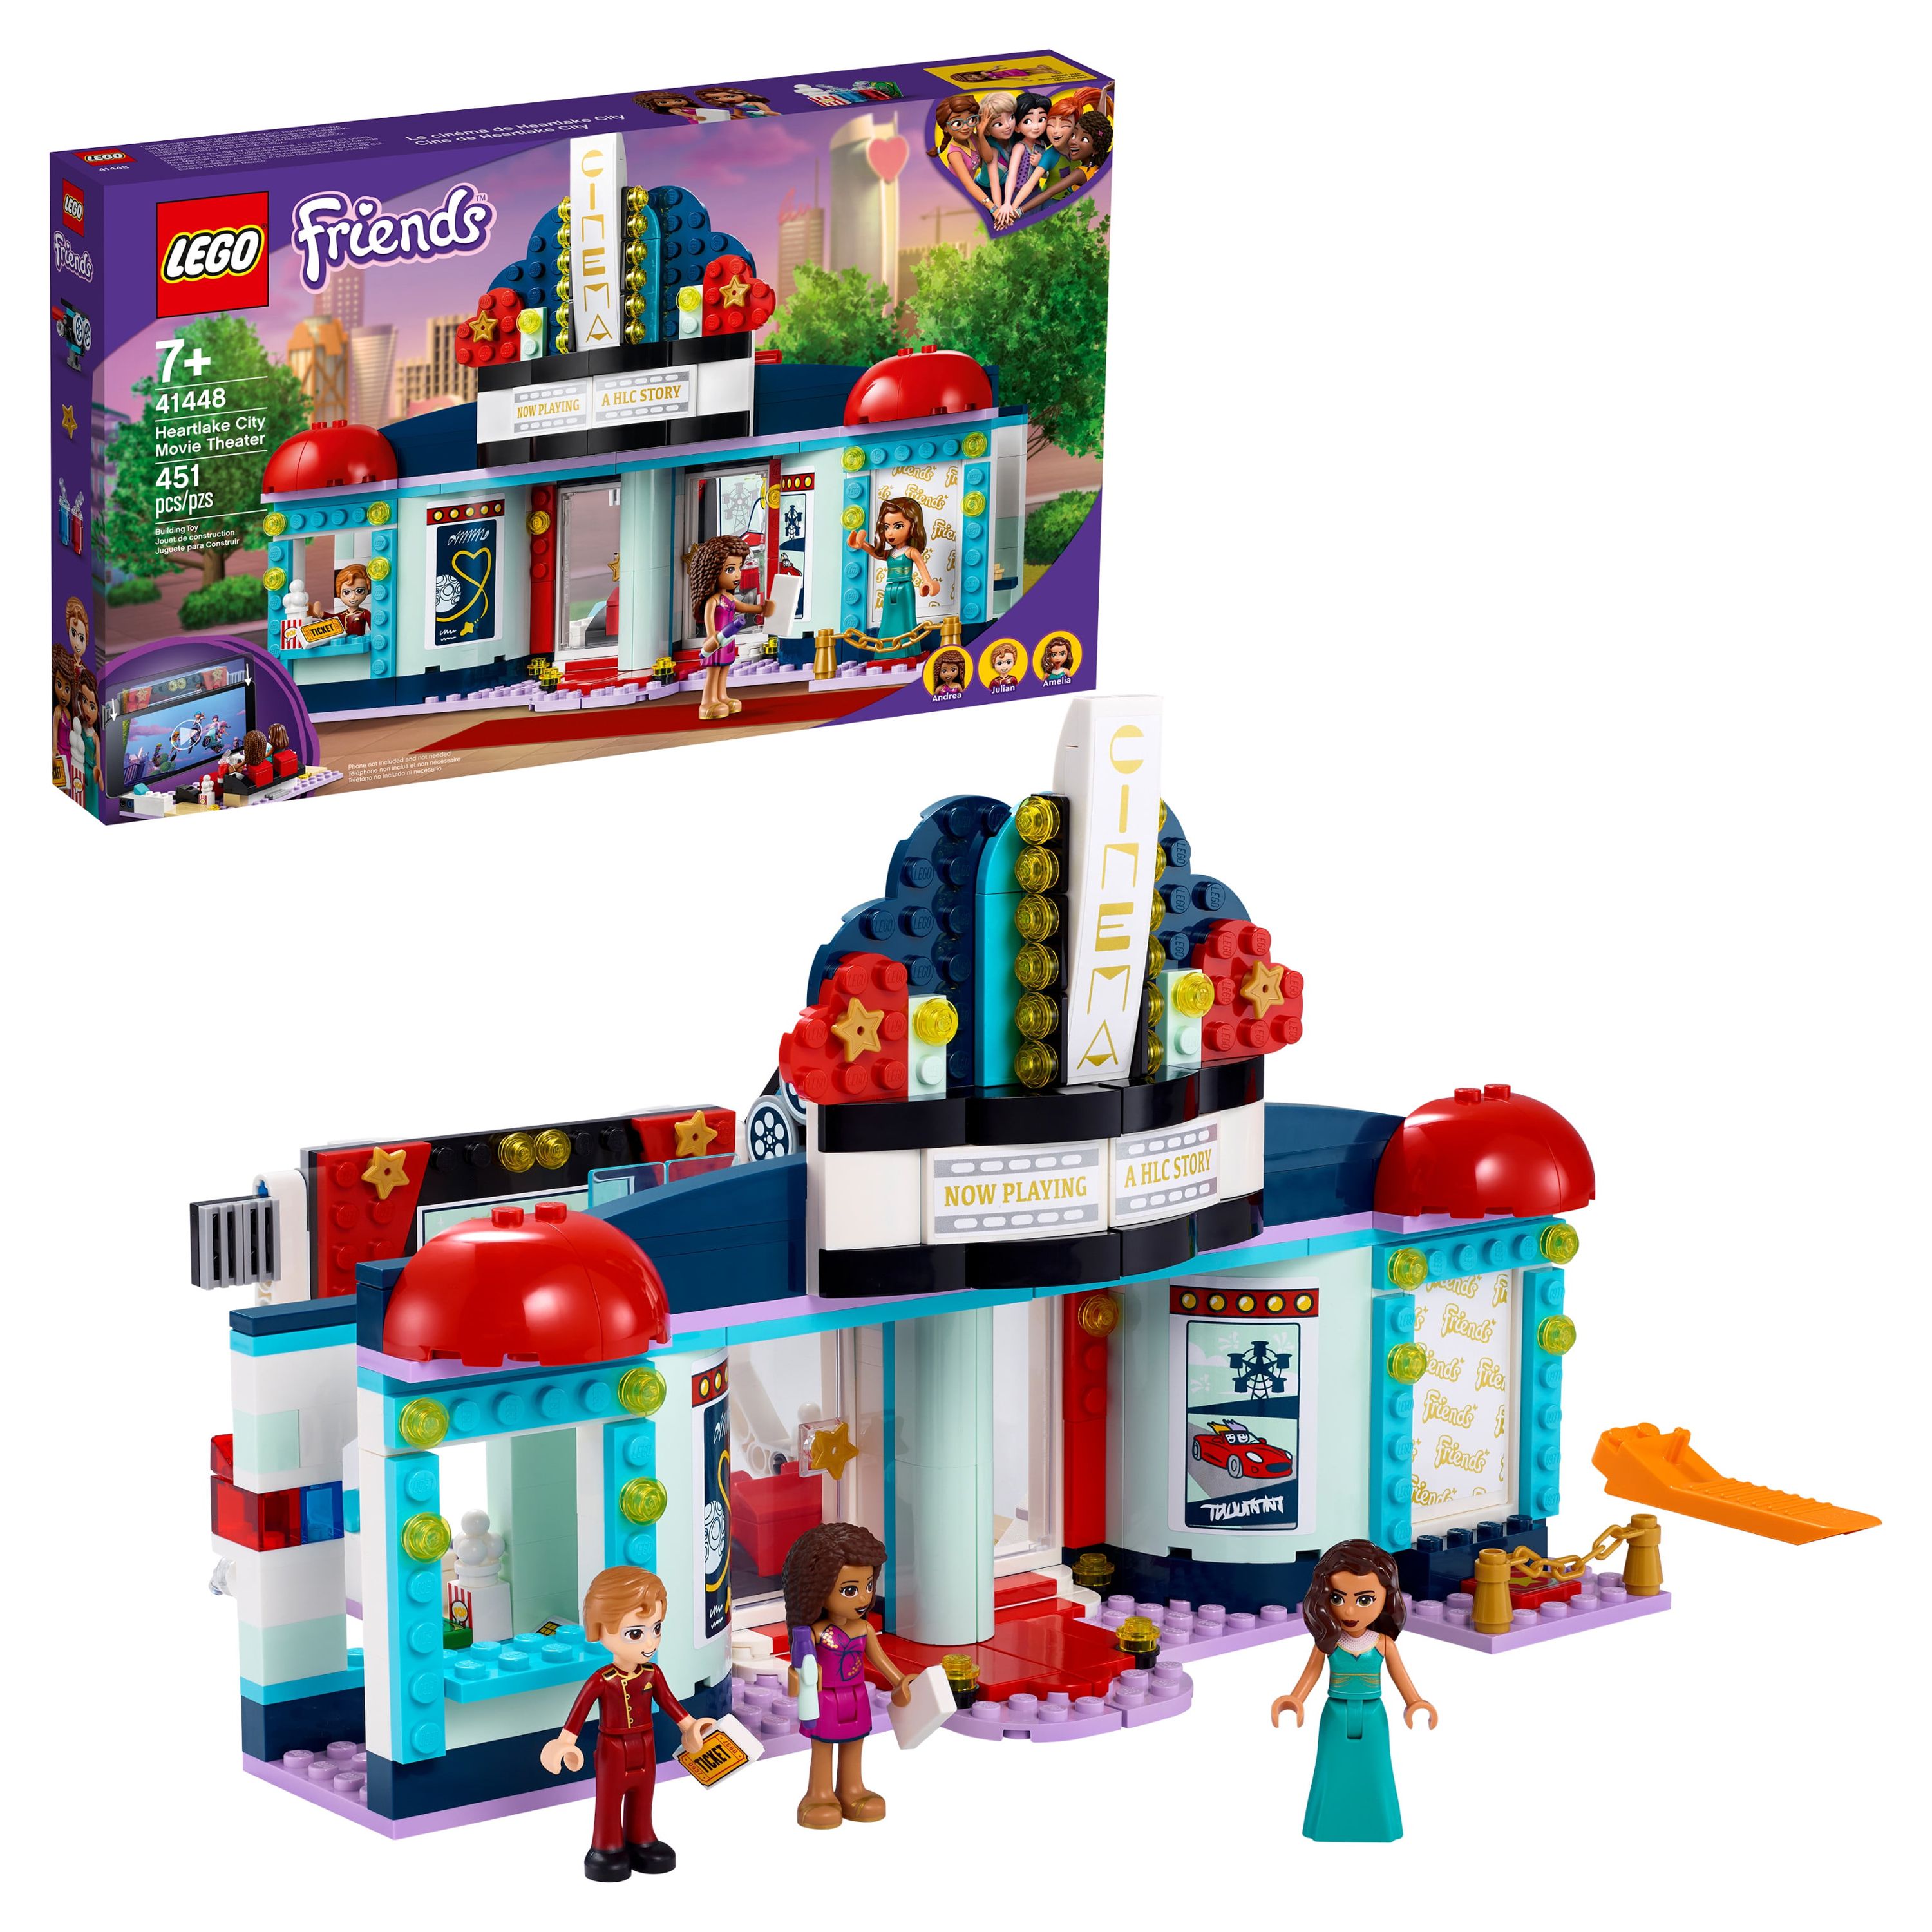 LEGO Friends Heartlake City Movie Theater Set 41448 Building Toy; Great Gift for Kids (451 Pieces) - image 1 of 7